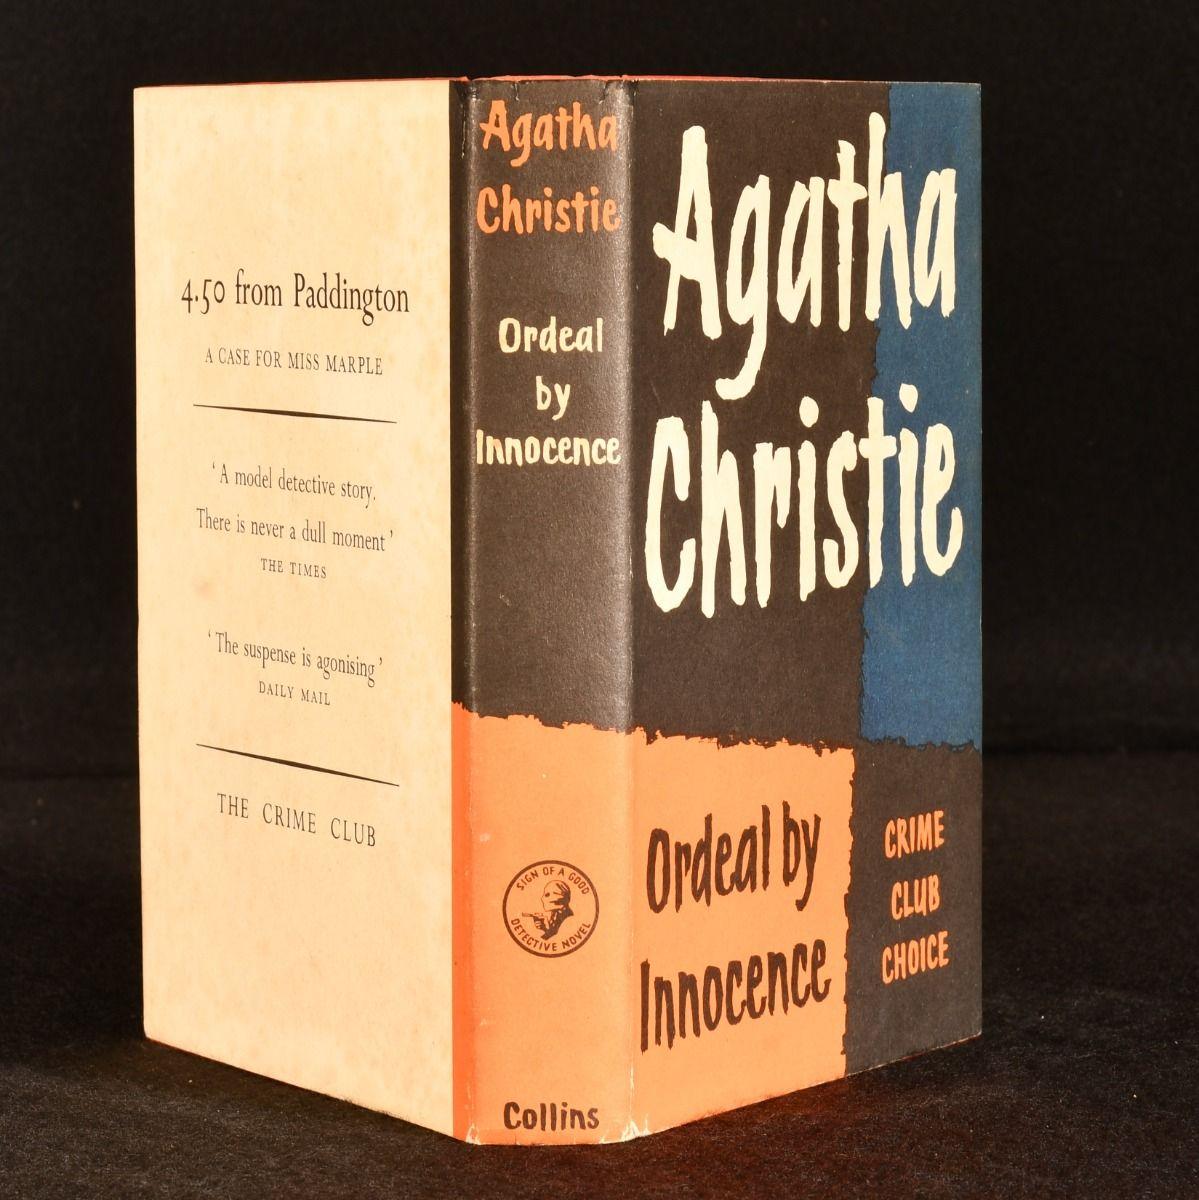 A vanishingly scarce to see signed first edition of this classic Christie mystery.

The first edition, first impression, with no further impressions stated. In the original unclipped dust wrapper.

Signed and dedicated by the author to the front